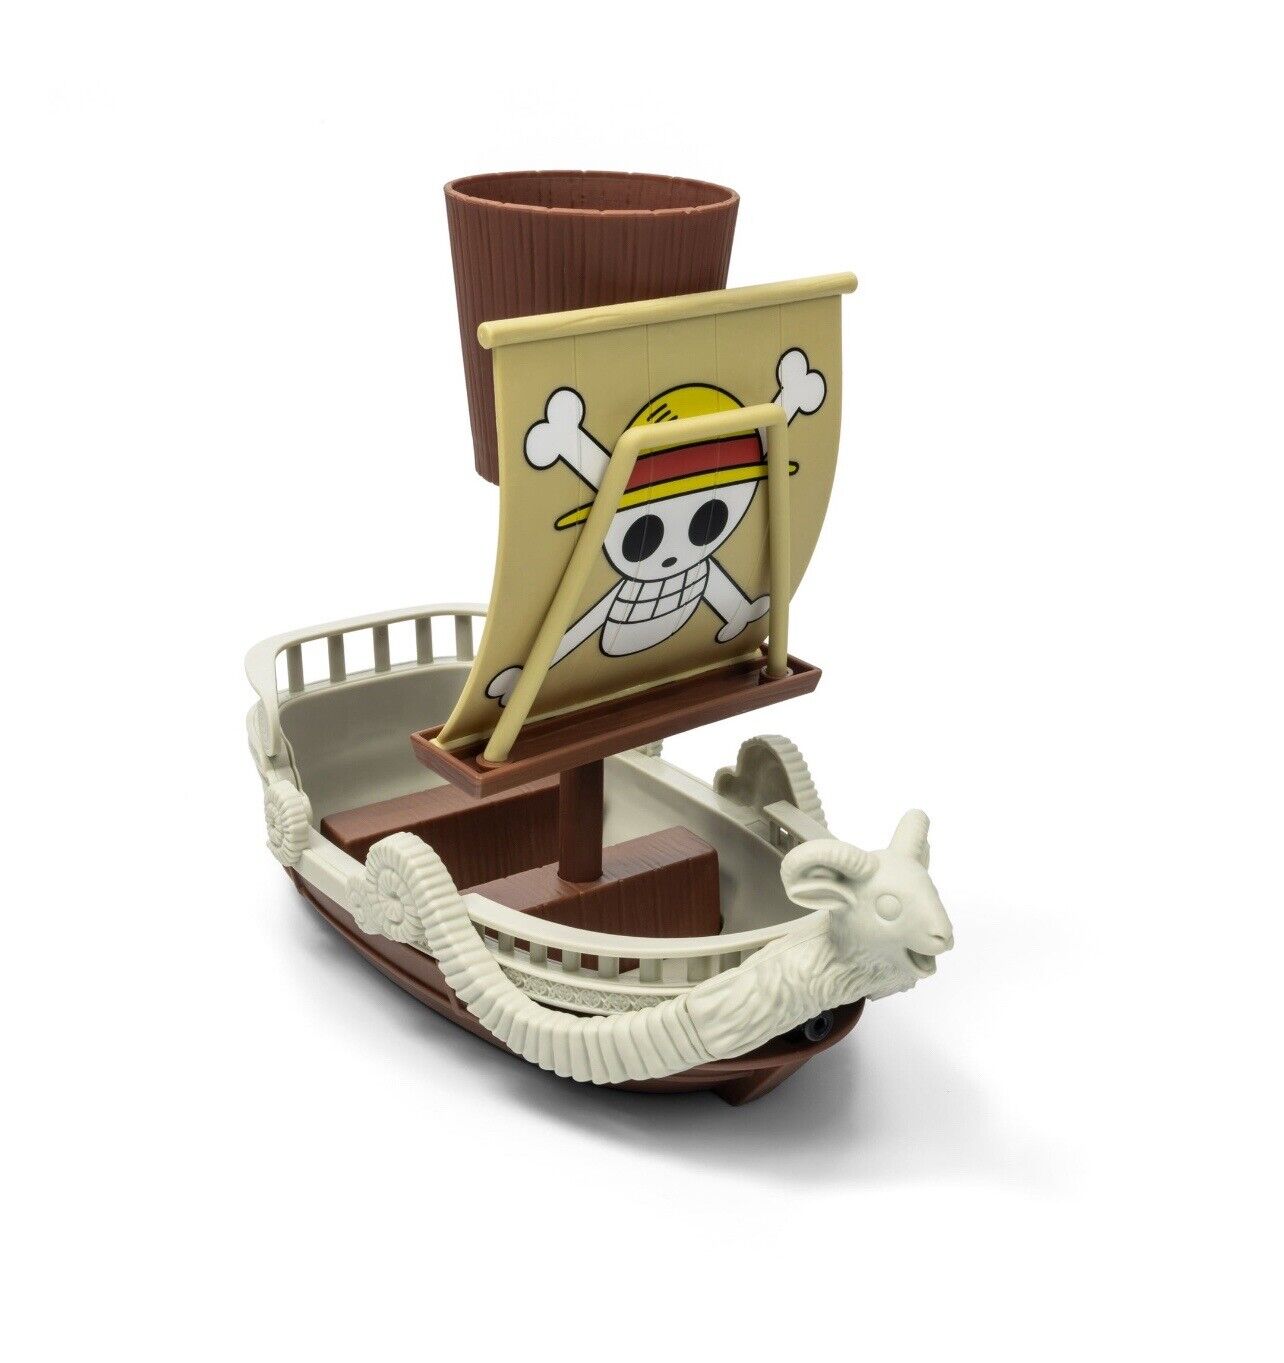 One Piece Going Merry Ship n\' Dip Snack Set Netflix Holds Variety Of Snacks New